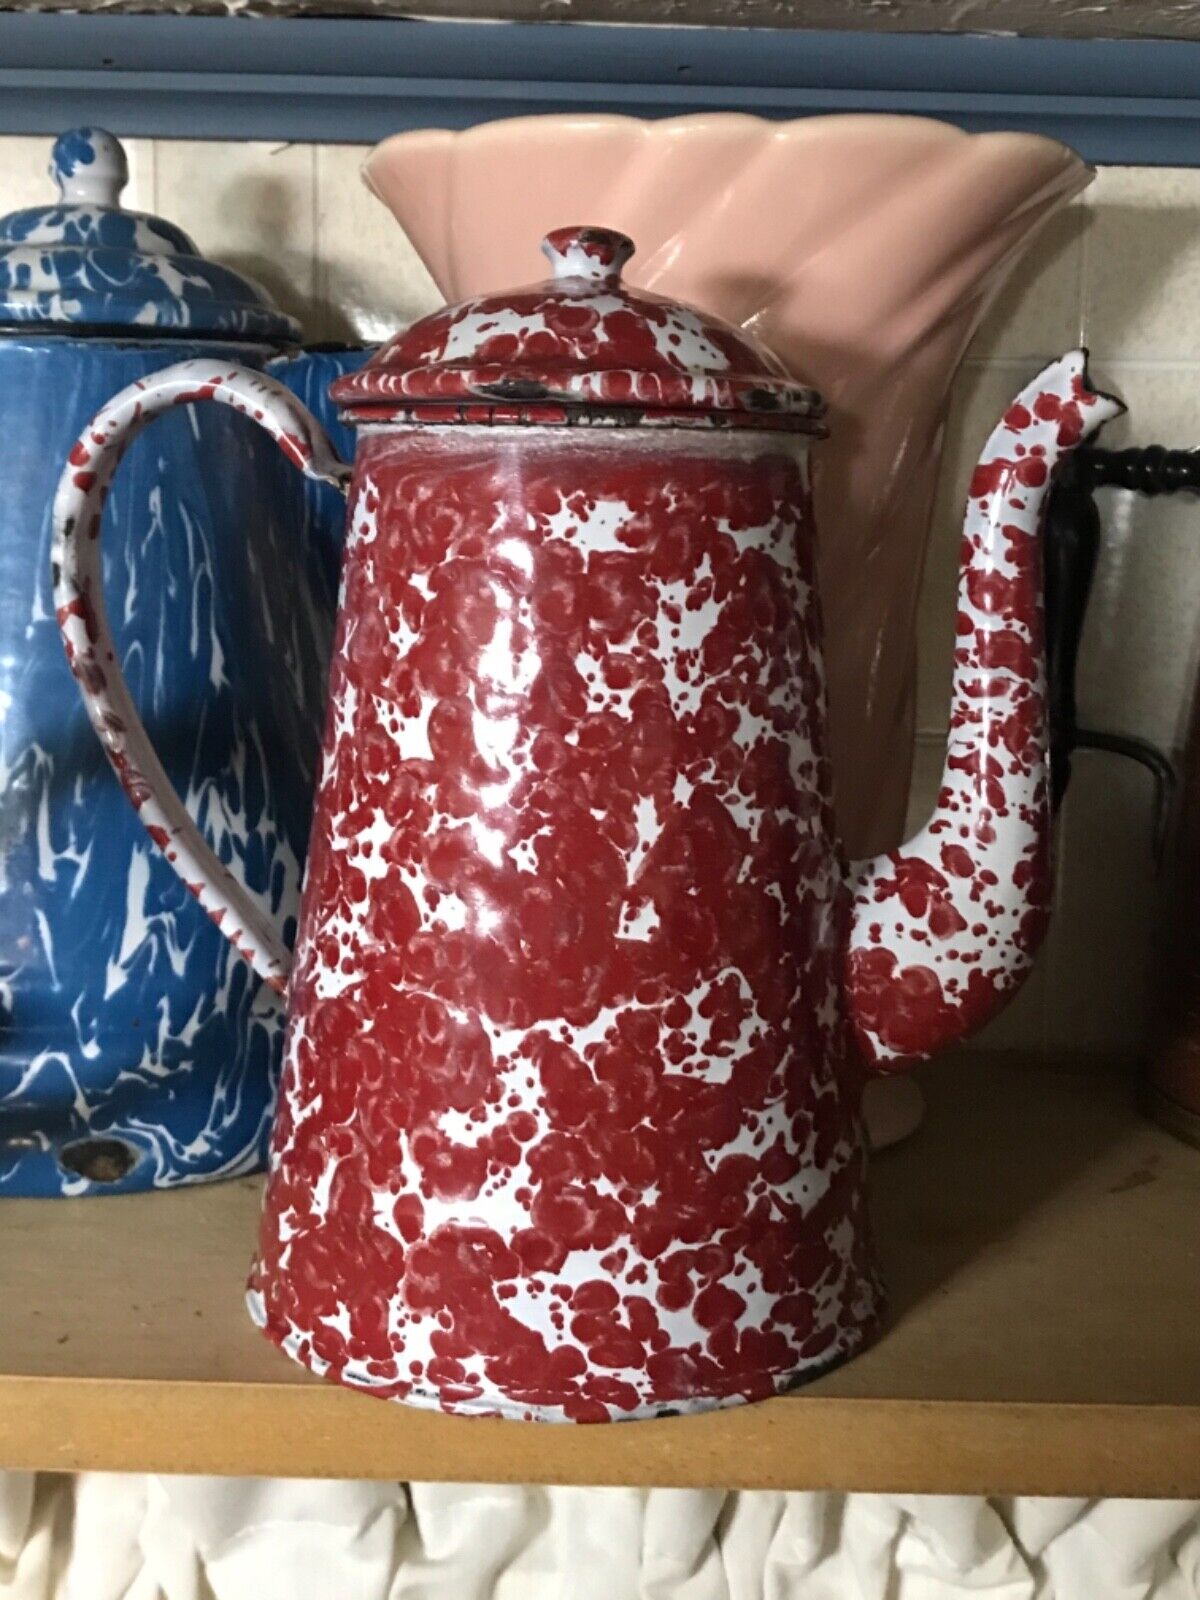 EXTREMELY RARE EARLY RED & WHITE COFFEE/TEAPOT  GRANITEWARE  ENAMELWARE ANTIQUE